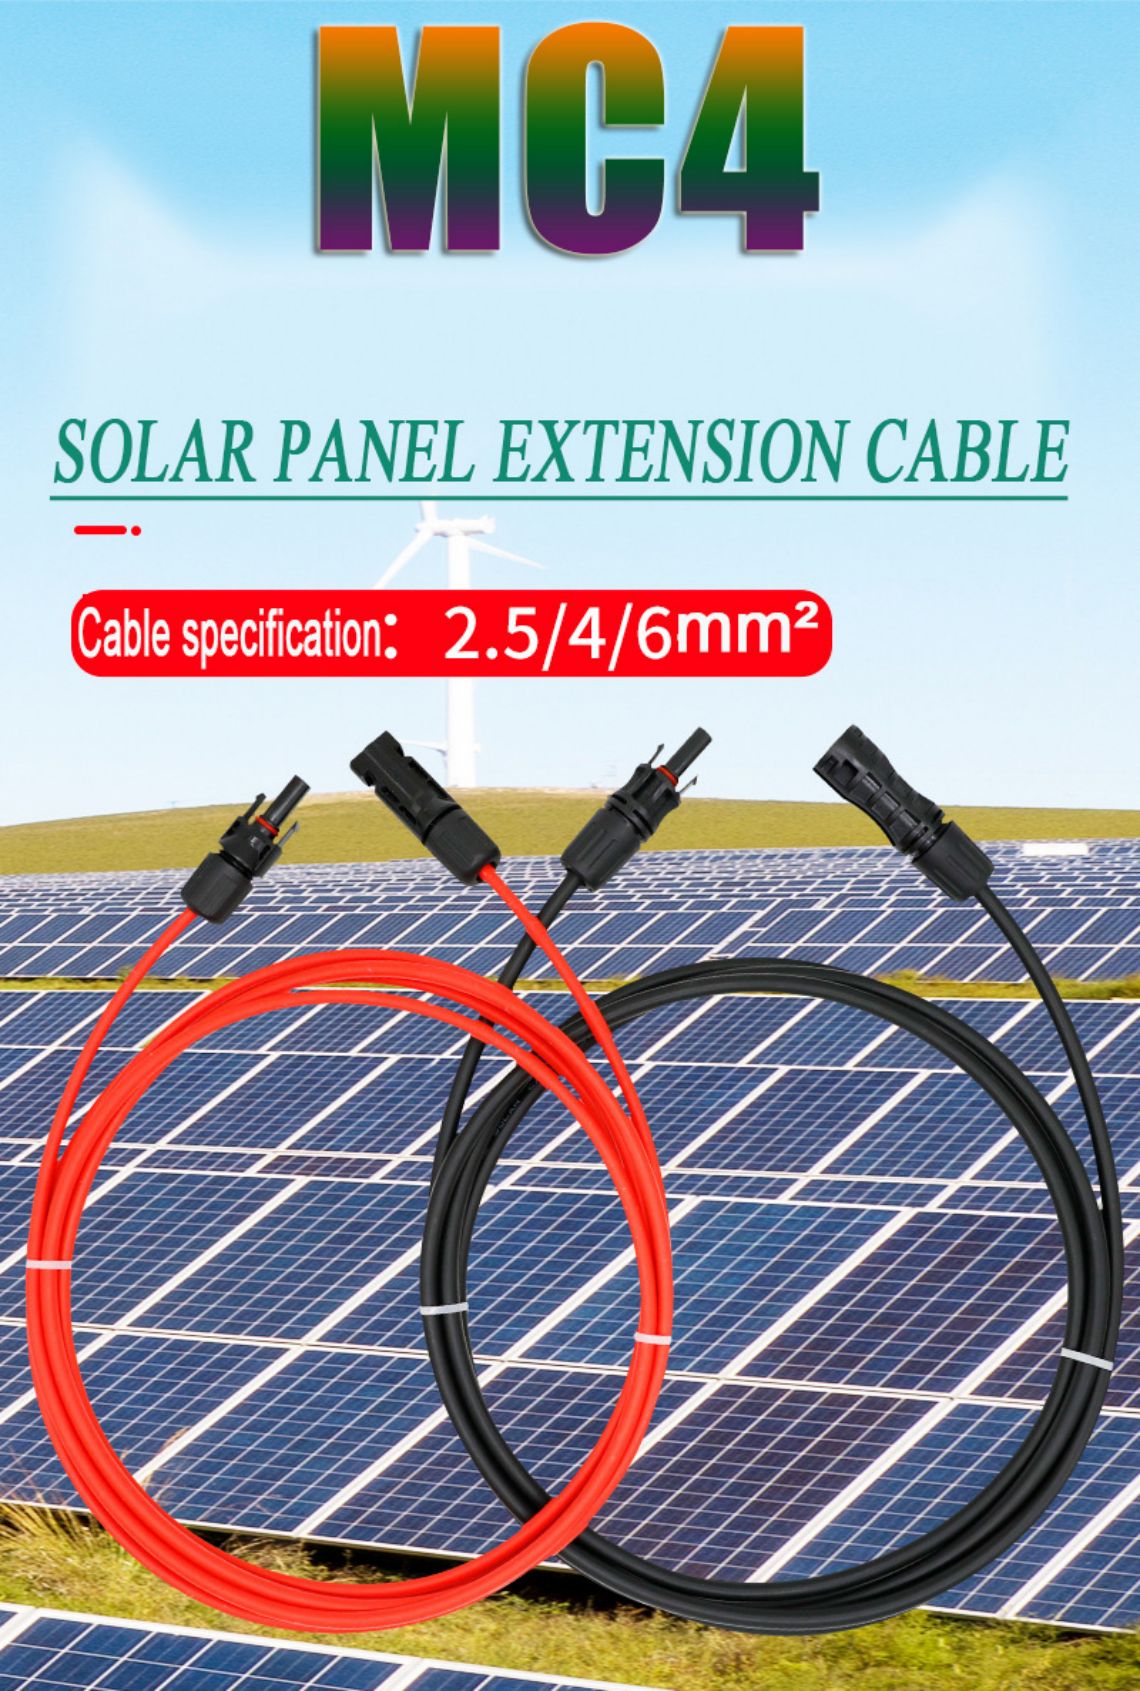 Solar extension connection cable is a special cable used for power transmission and connection in solar system. It is mainly used to connect solar panels, solar controllers, inverters, and other solar equipment or load equipment. Solar extension cables need to have some special properties to cope with the working environment of solar systems. First of all, it must have high temperature resistance, because solar panels will generate heat in the sun, and cables must be able to withstand high temperature environments. Second, solar extension connection cables need to be UV-resistant and weather-resistant to deal with long-term outdoor exposure to solar radiation and climate change. In addition, the insulation of the cable needs to be waterproof and corrosion-resistant to prevent the intrusion of moisture and other harmful substances. There are different options for solar extension connection cables in length and specifications, and the choice should be made according to the specific needs and layout of the solar system. When installing a solar system, using the correct solar extension cable is an important part to ensure the efficiency of power transmission and the safe and stable operation of the system.